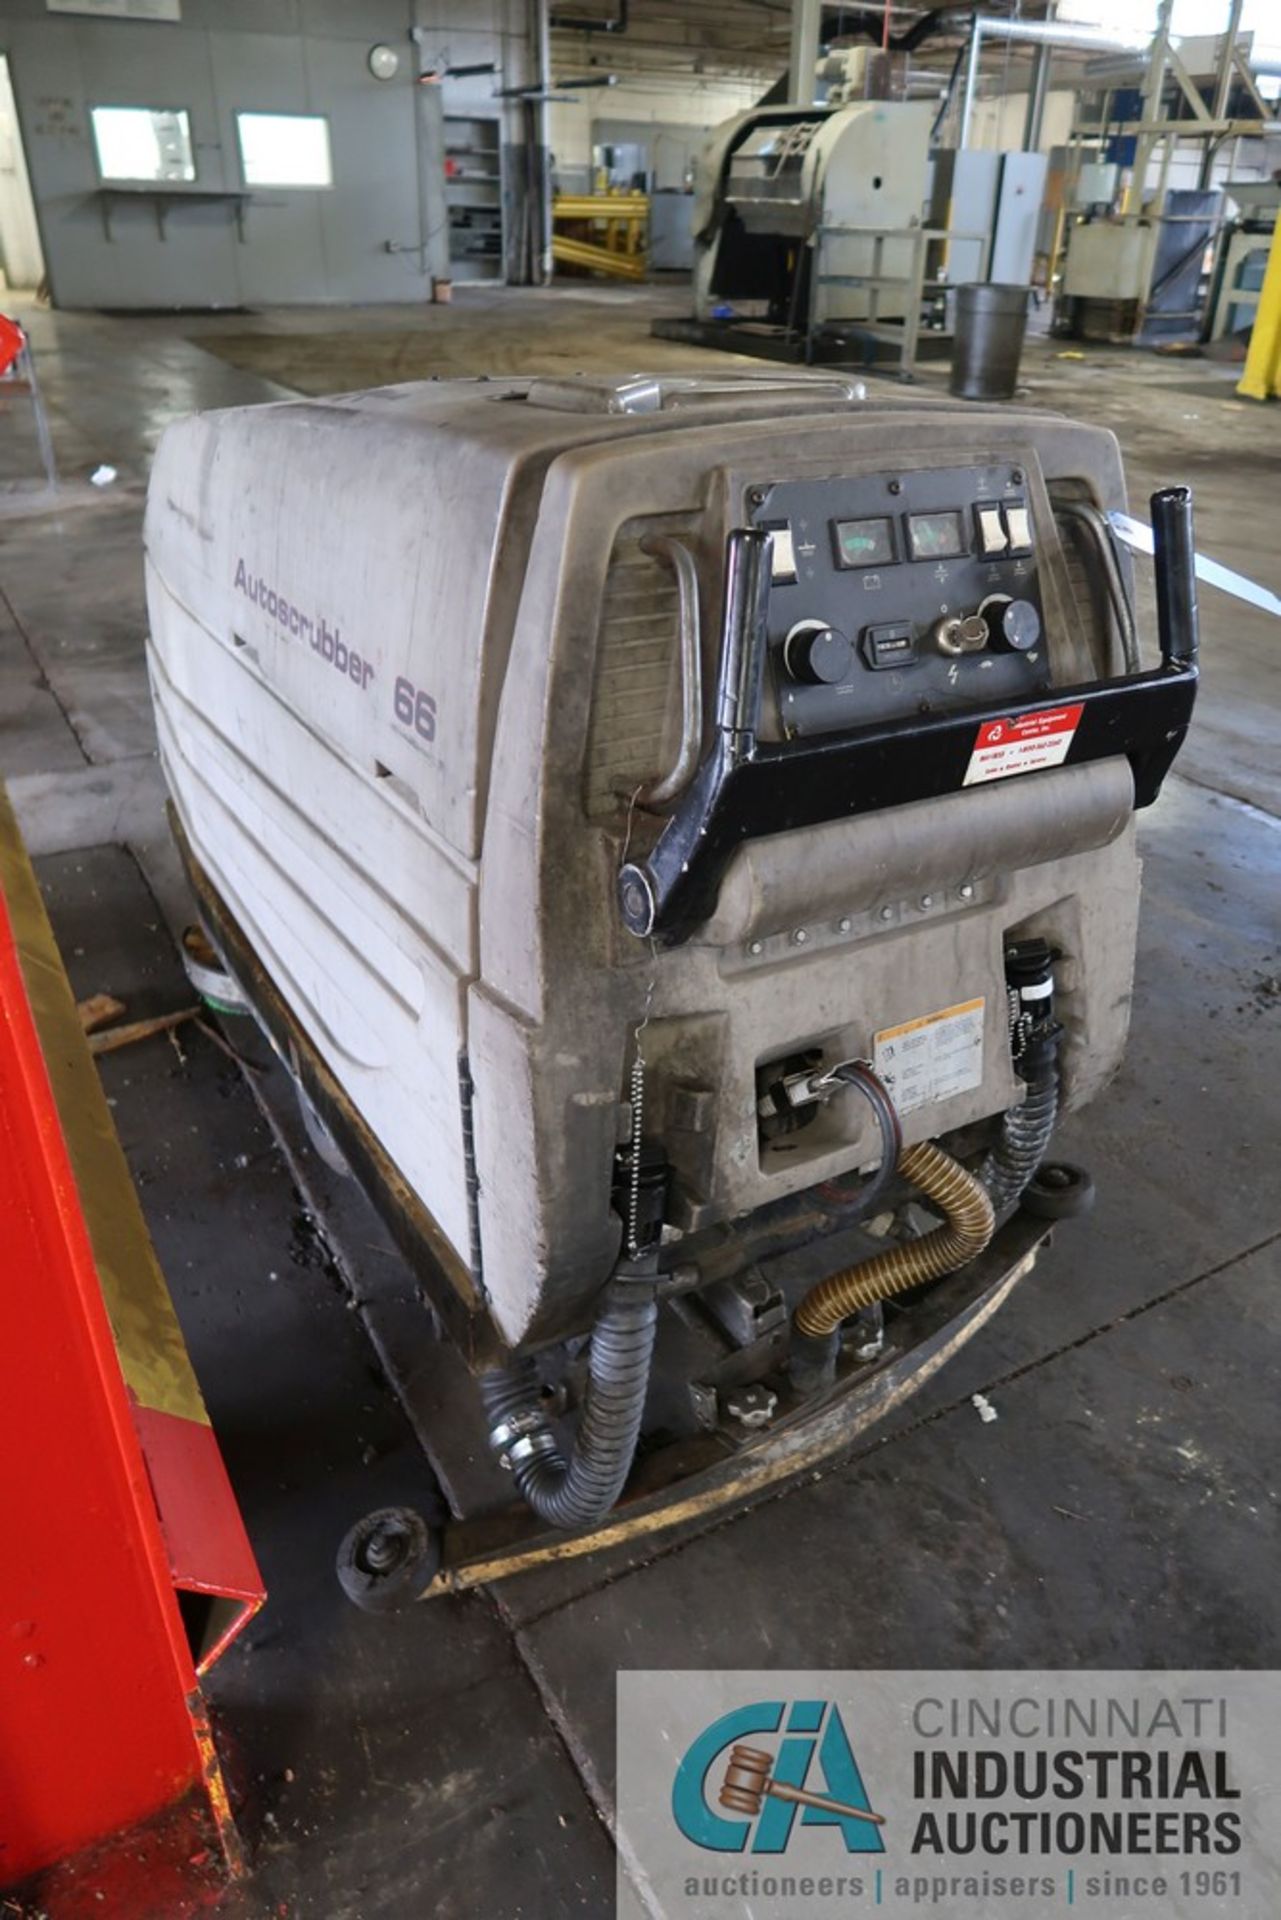 AMERICAN LINCOLN AUTO SCRUBBER 66 WALK BEHIND FLOOR SCRUBBER; S/N 11374, 4,515 HOURS - Image 3 of 5